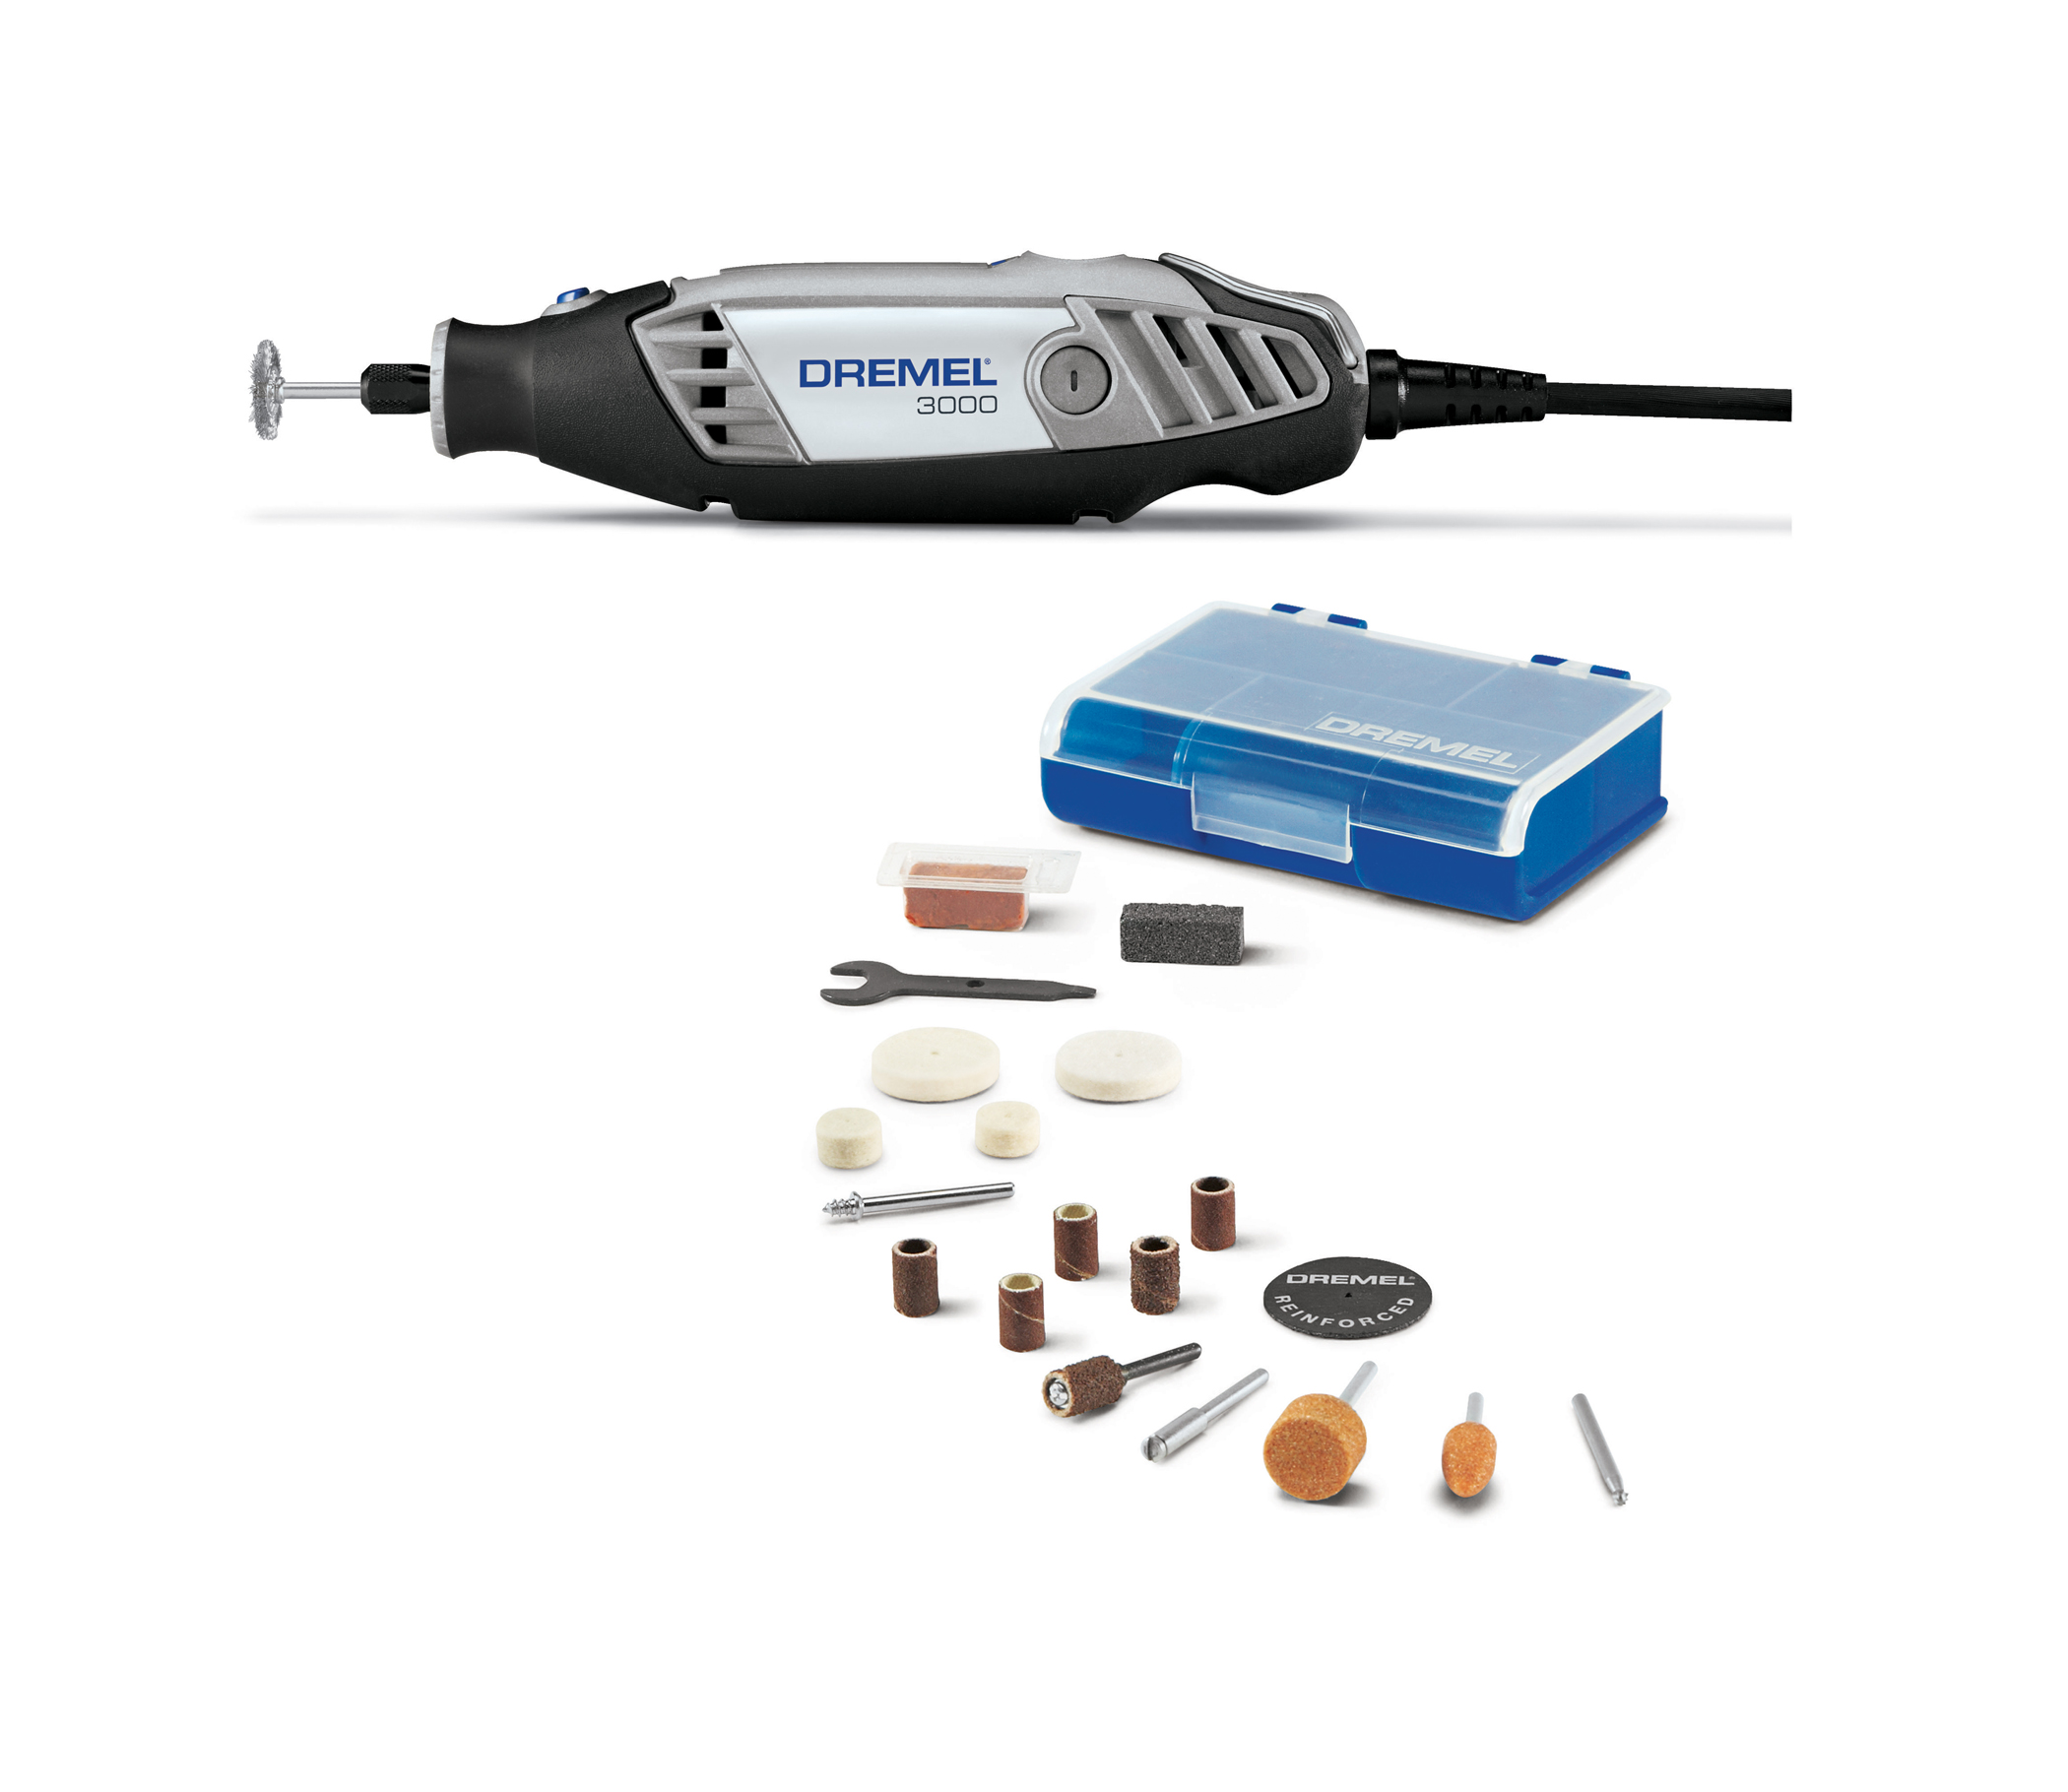 Dremel 3000-N/18 Variable Speed Rotary Tool with EZ Twist™ Nose Cap, 18 Accessories - image 1 of 27